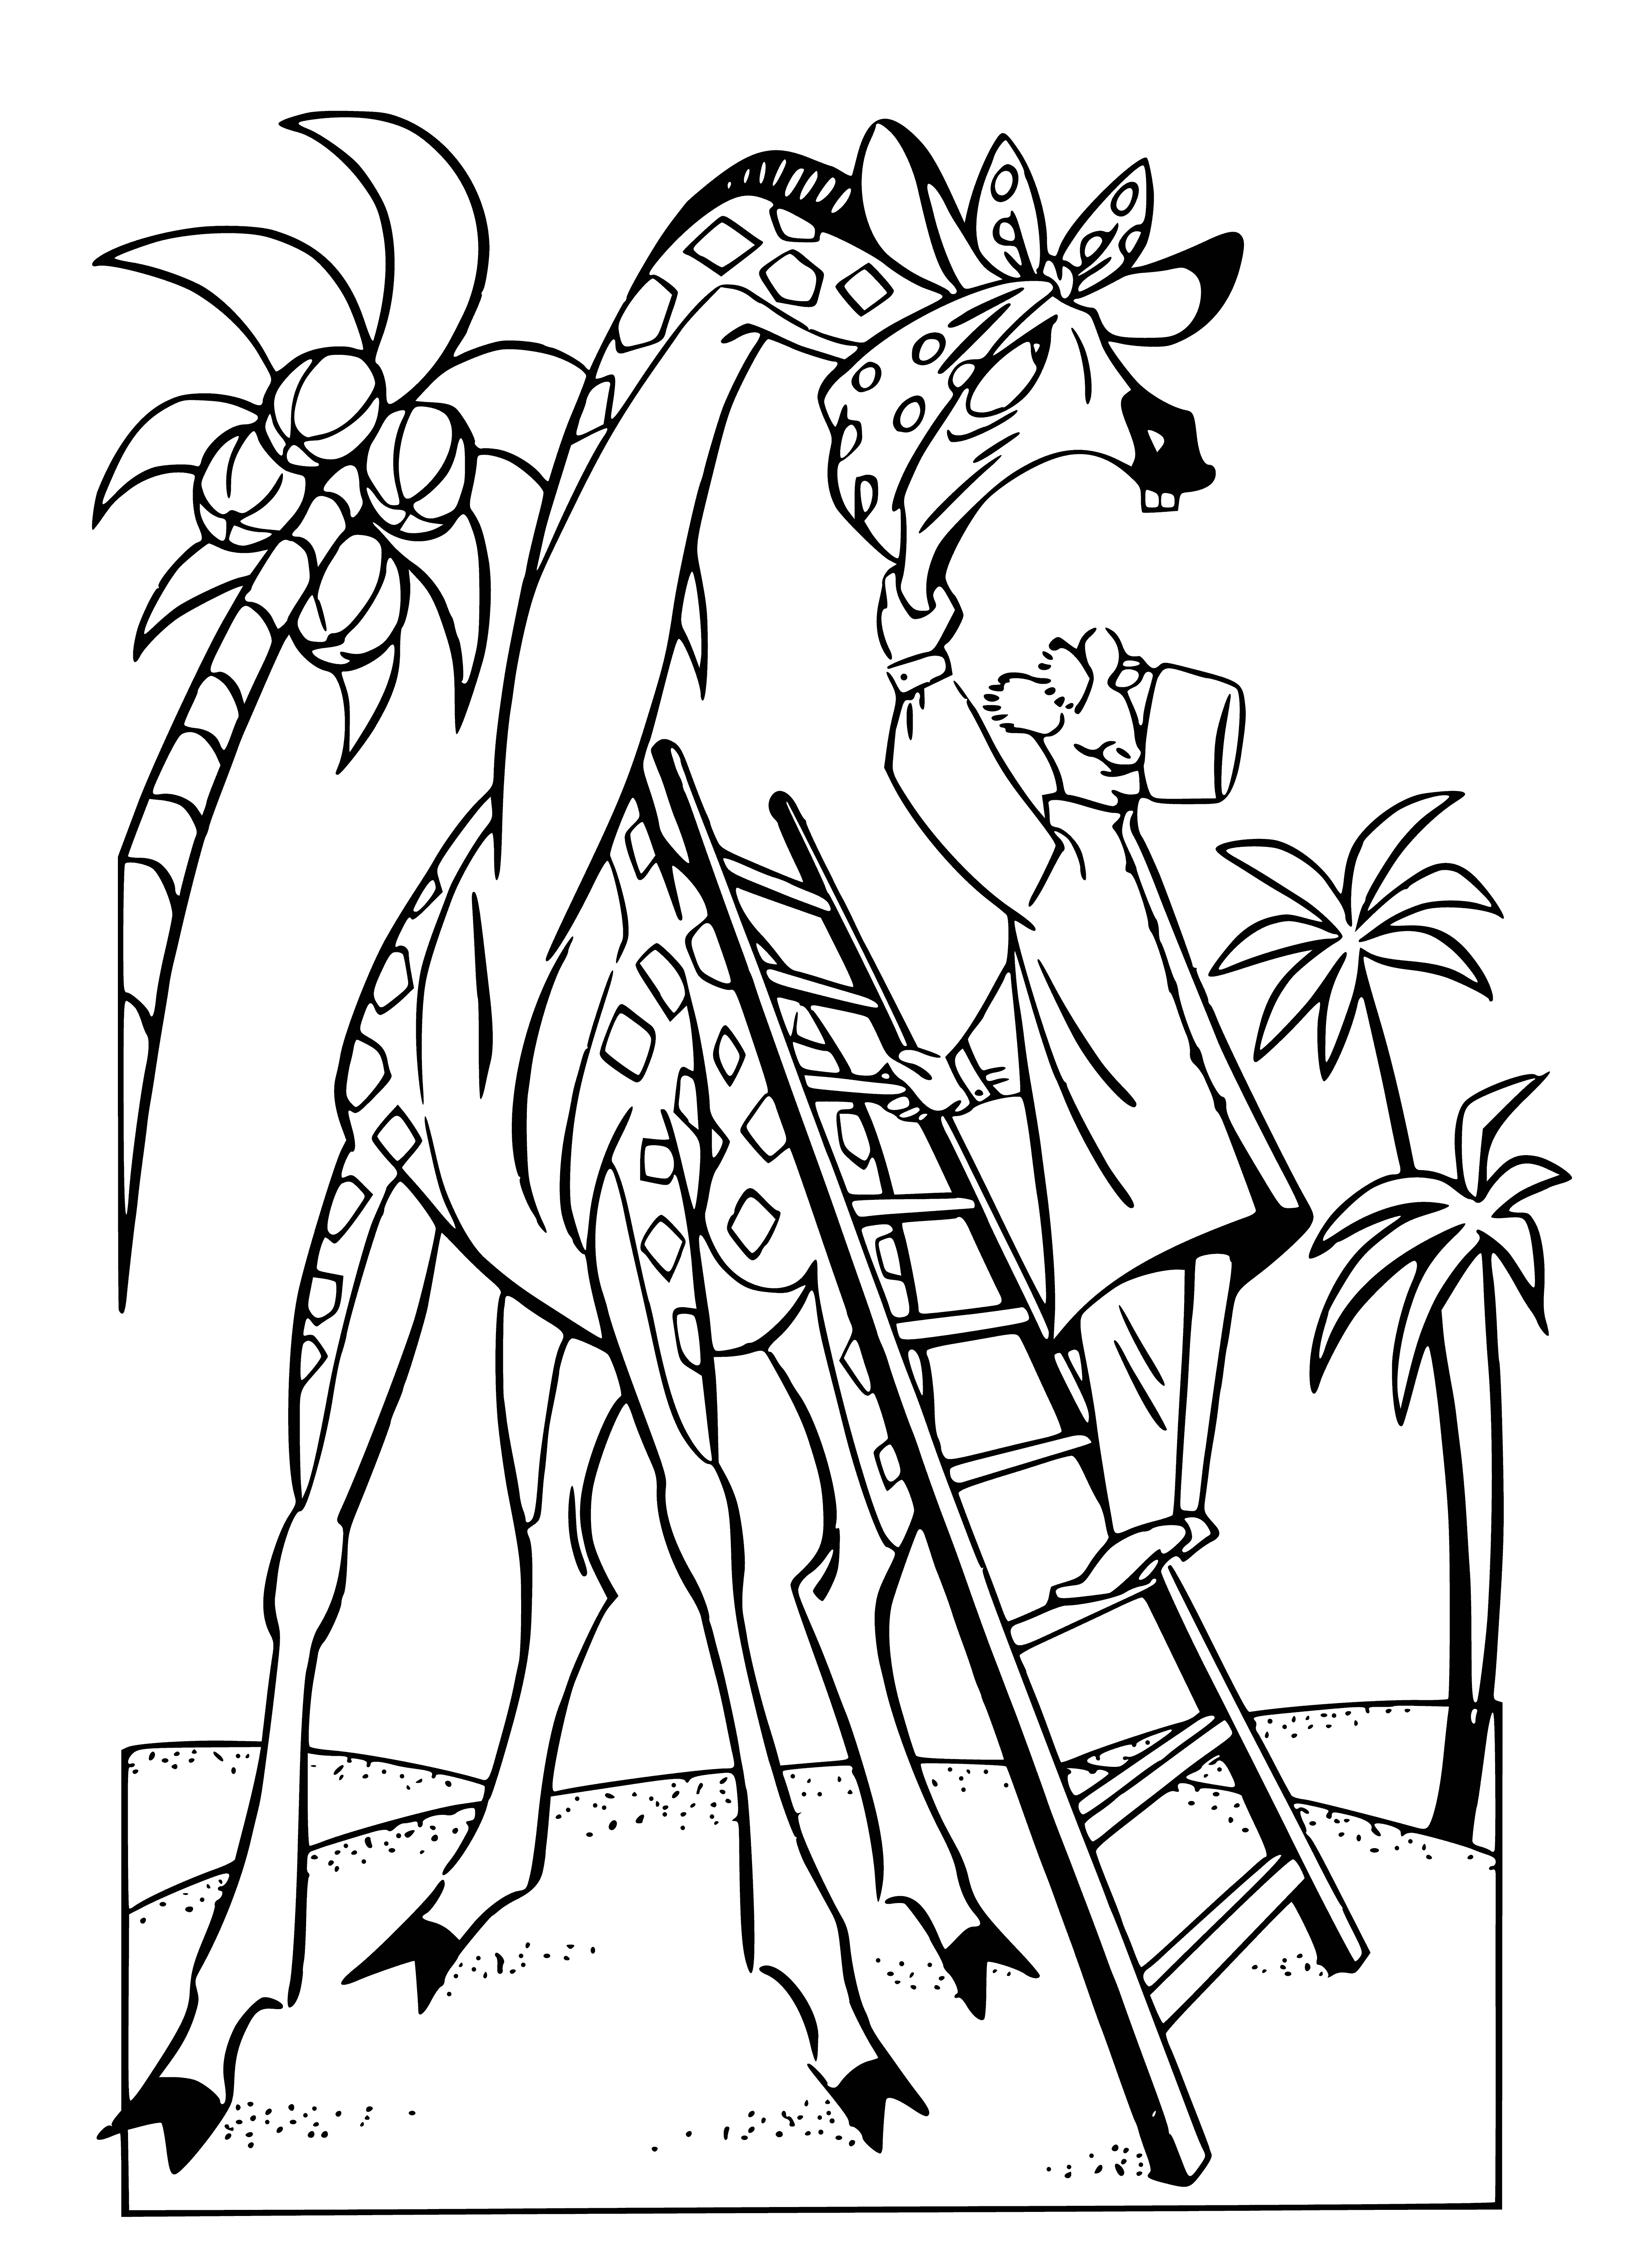 Aibolit and Giraffe coloring page